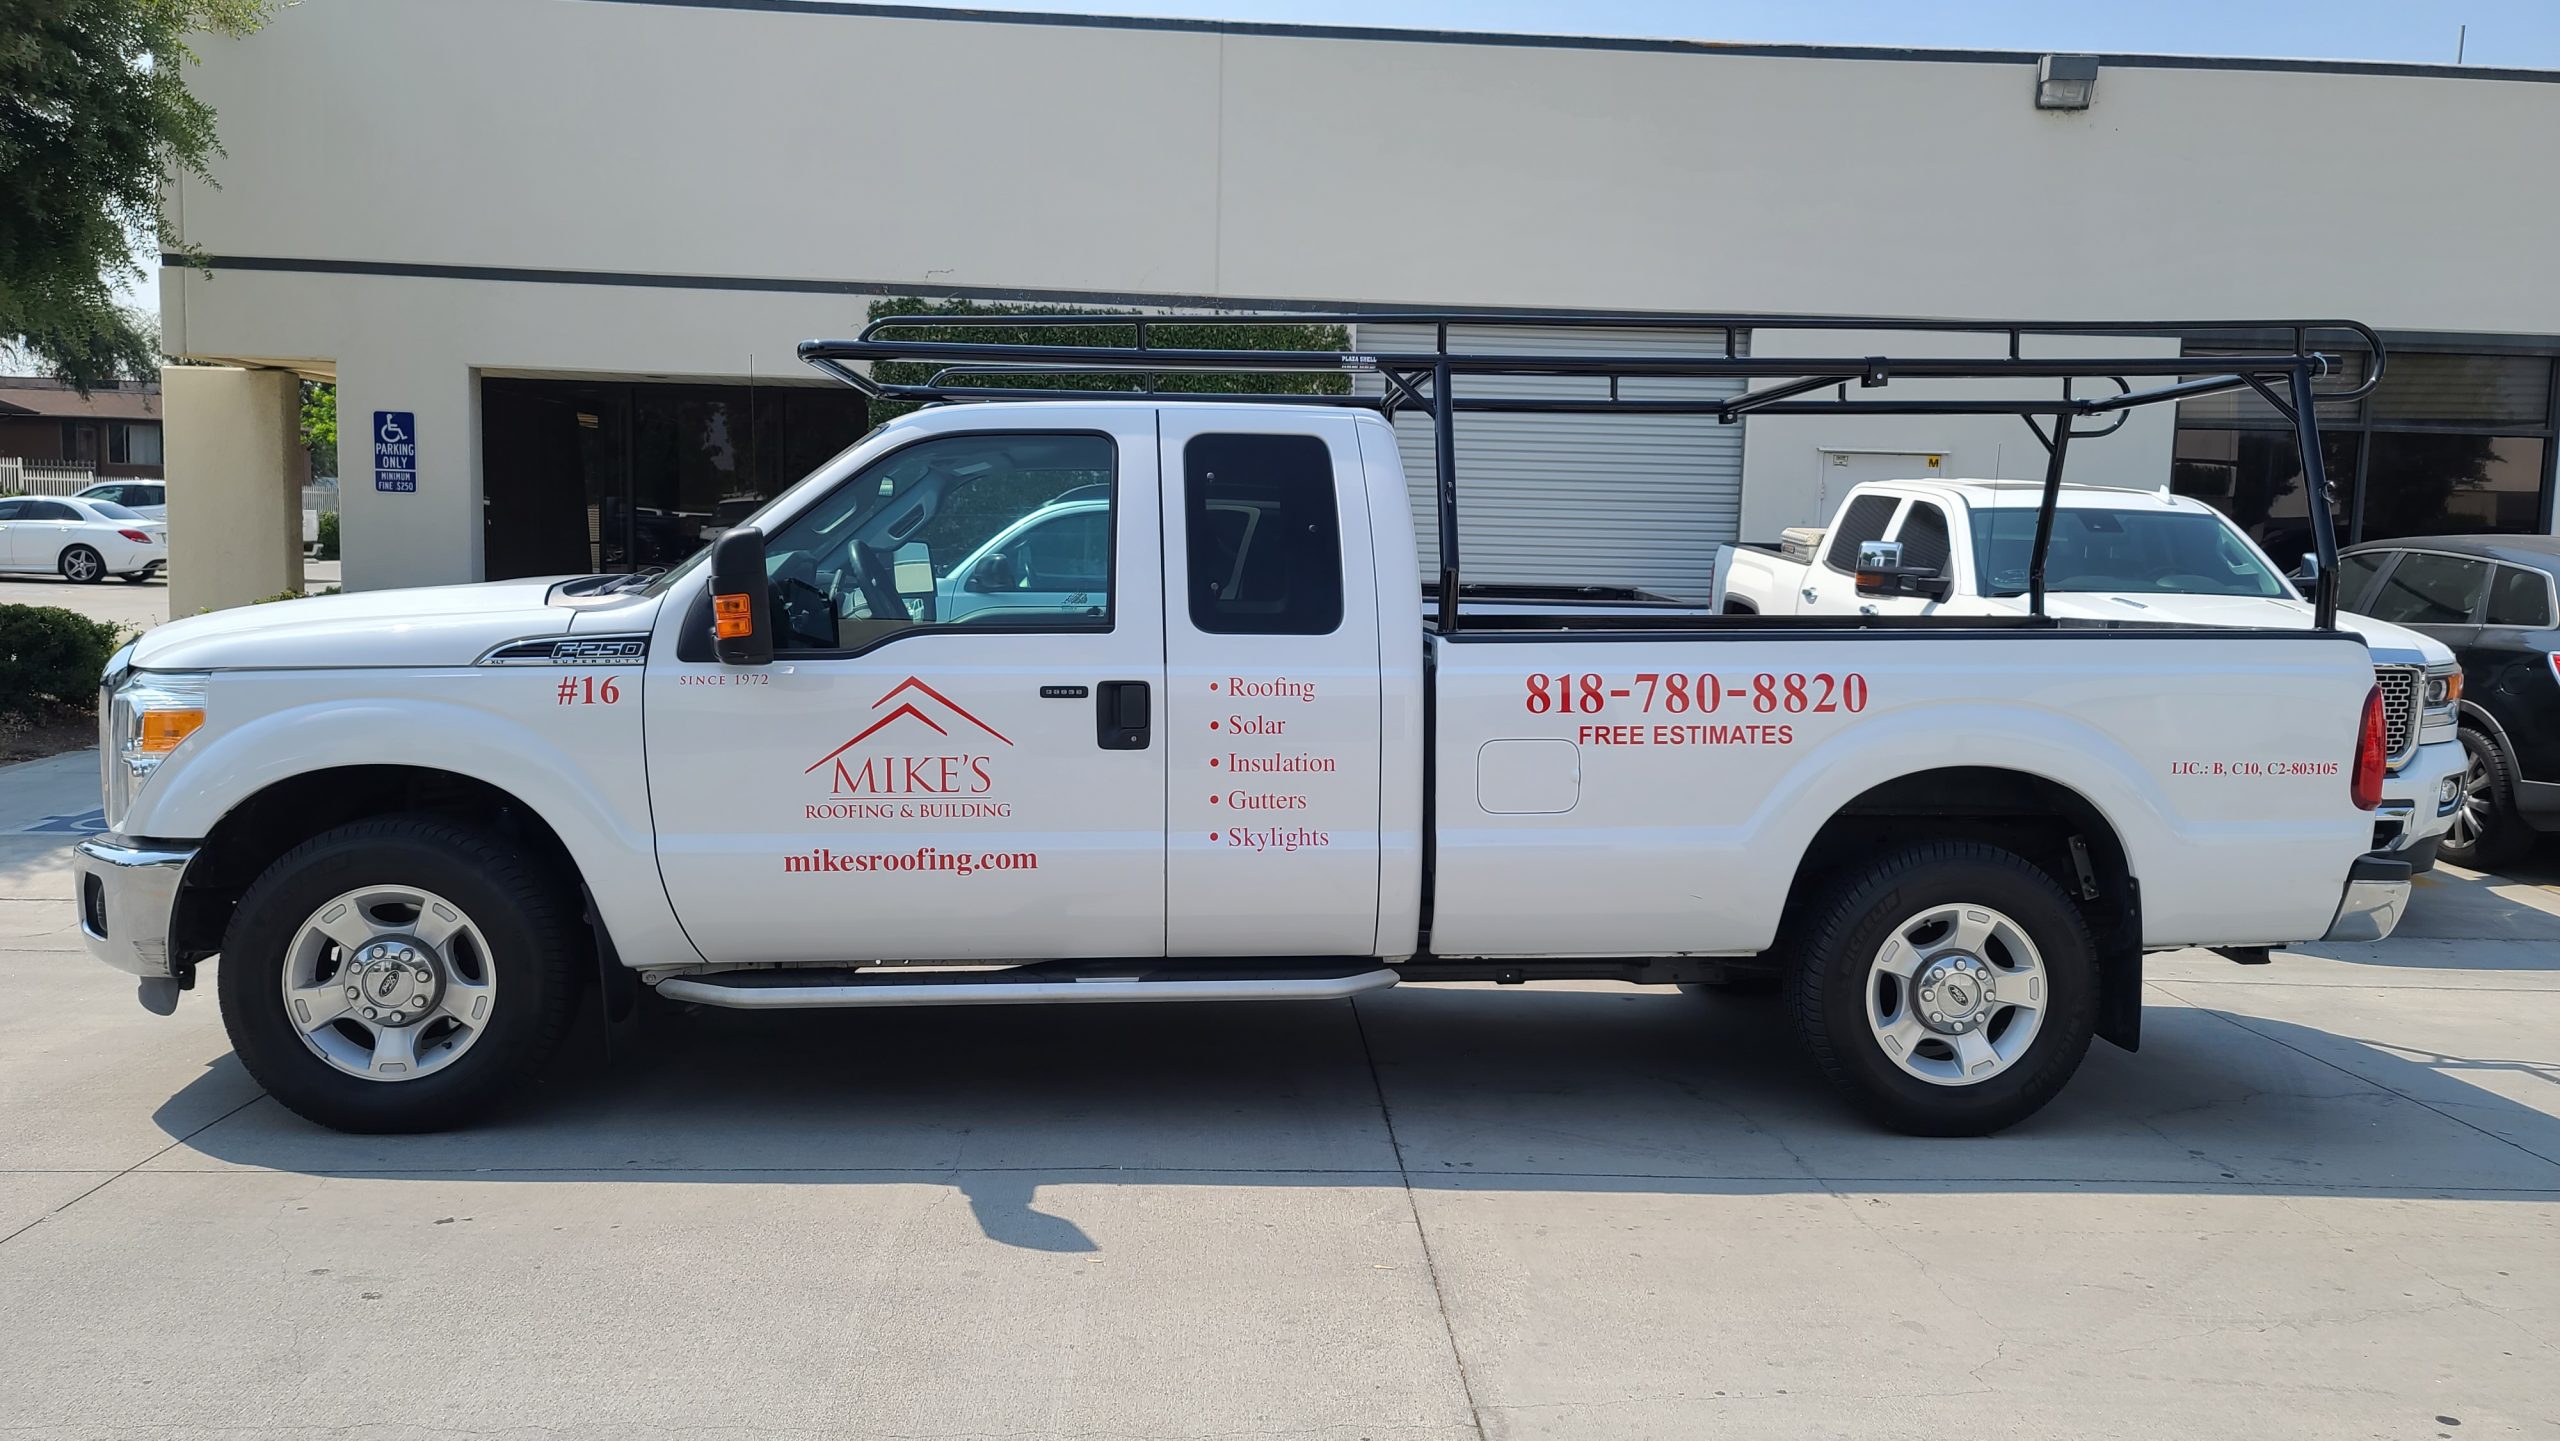 Rebranding also applies to vehicle wraps and graphics, like these new car decals for Mike Roofing's service truck that feature their company logo and contact details.